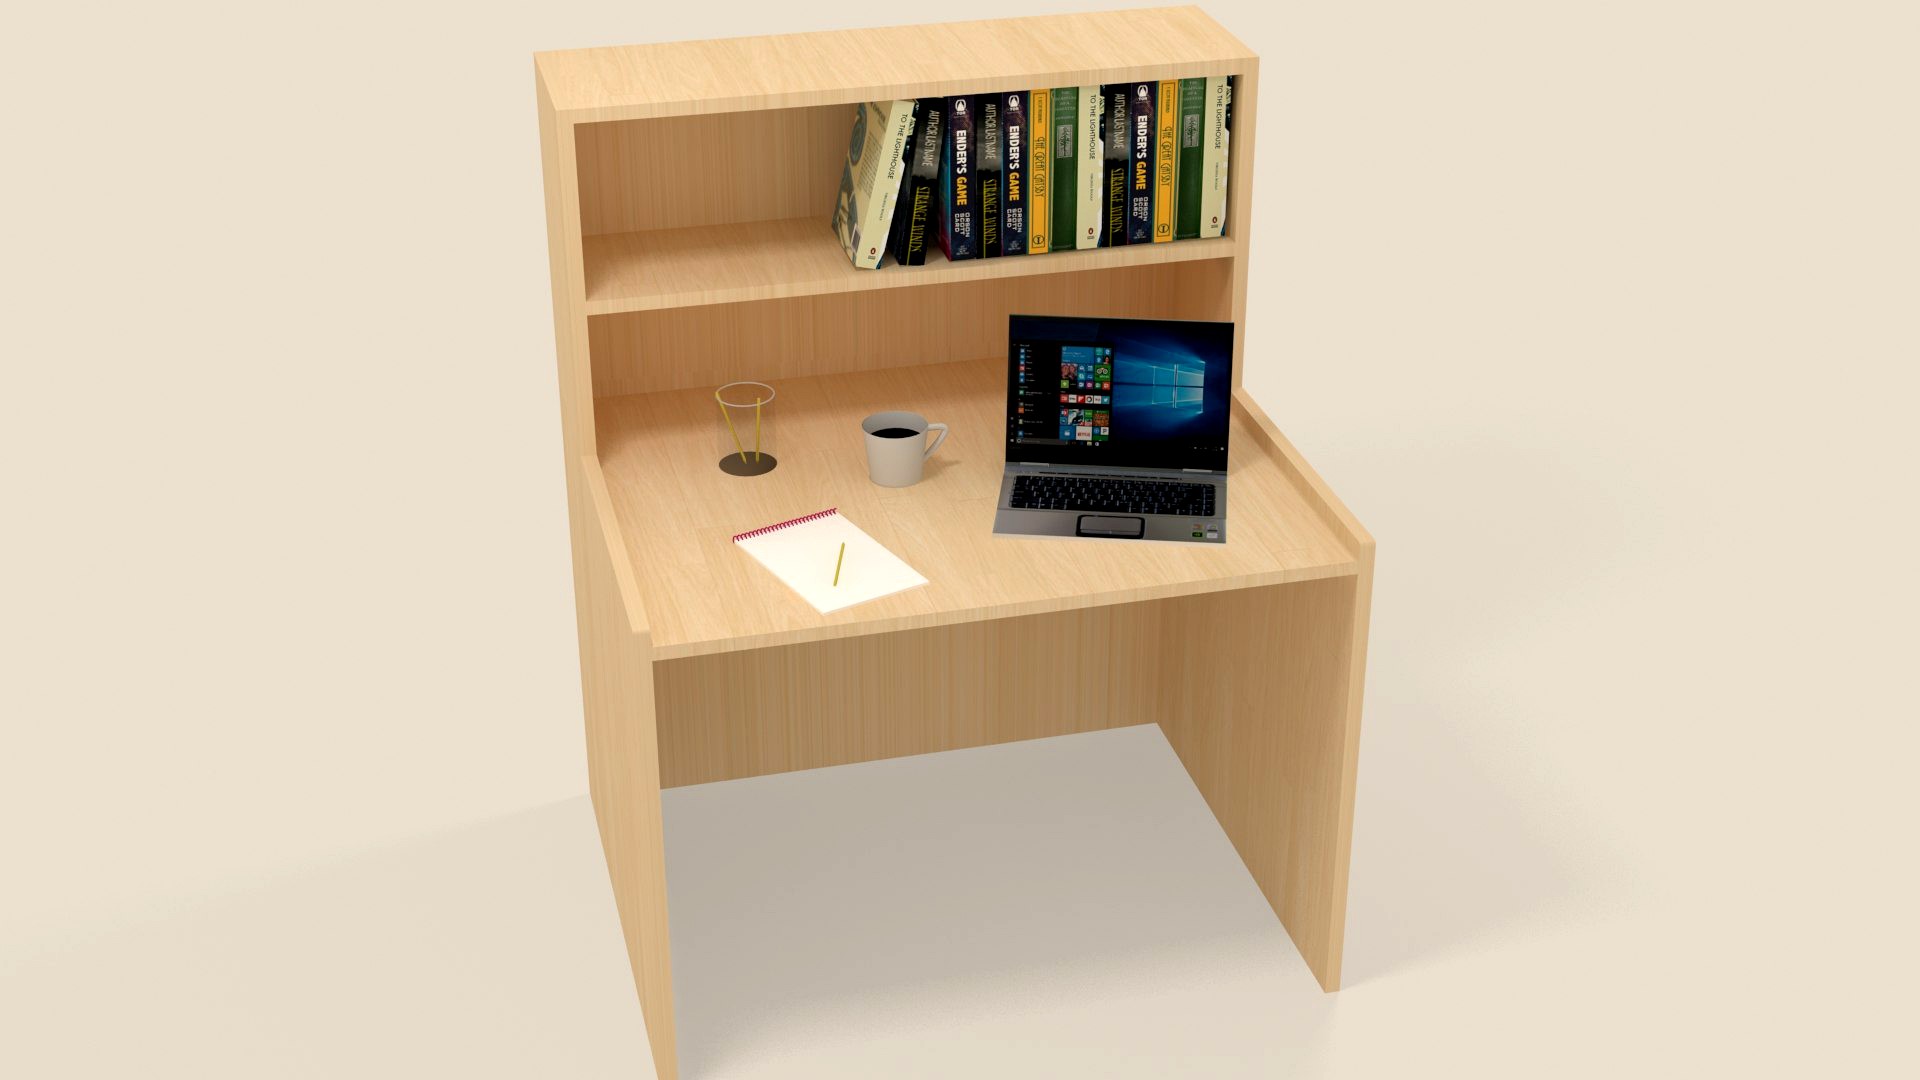 Reading Table with Book, Laptop Coffee Mug, writing pad in Open position